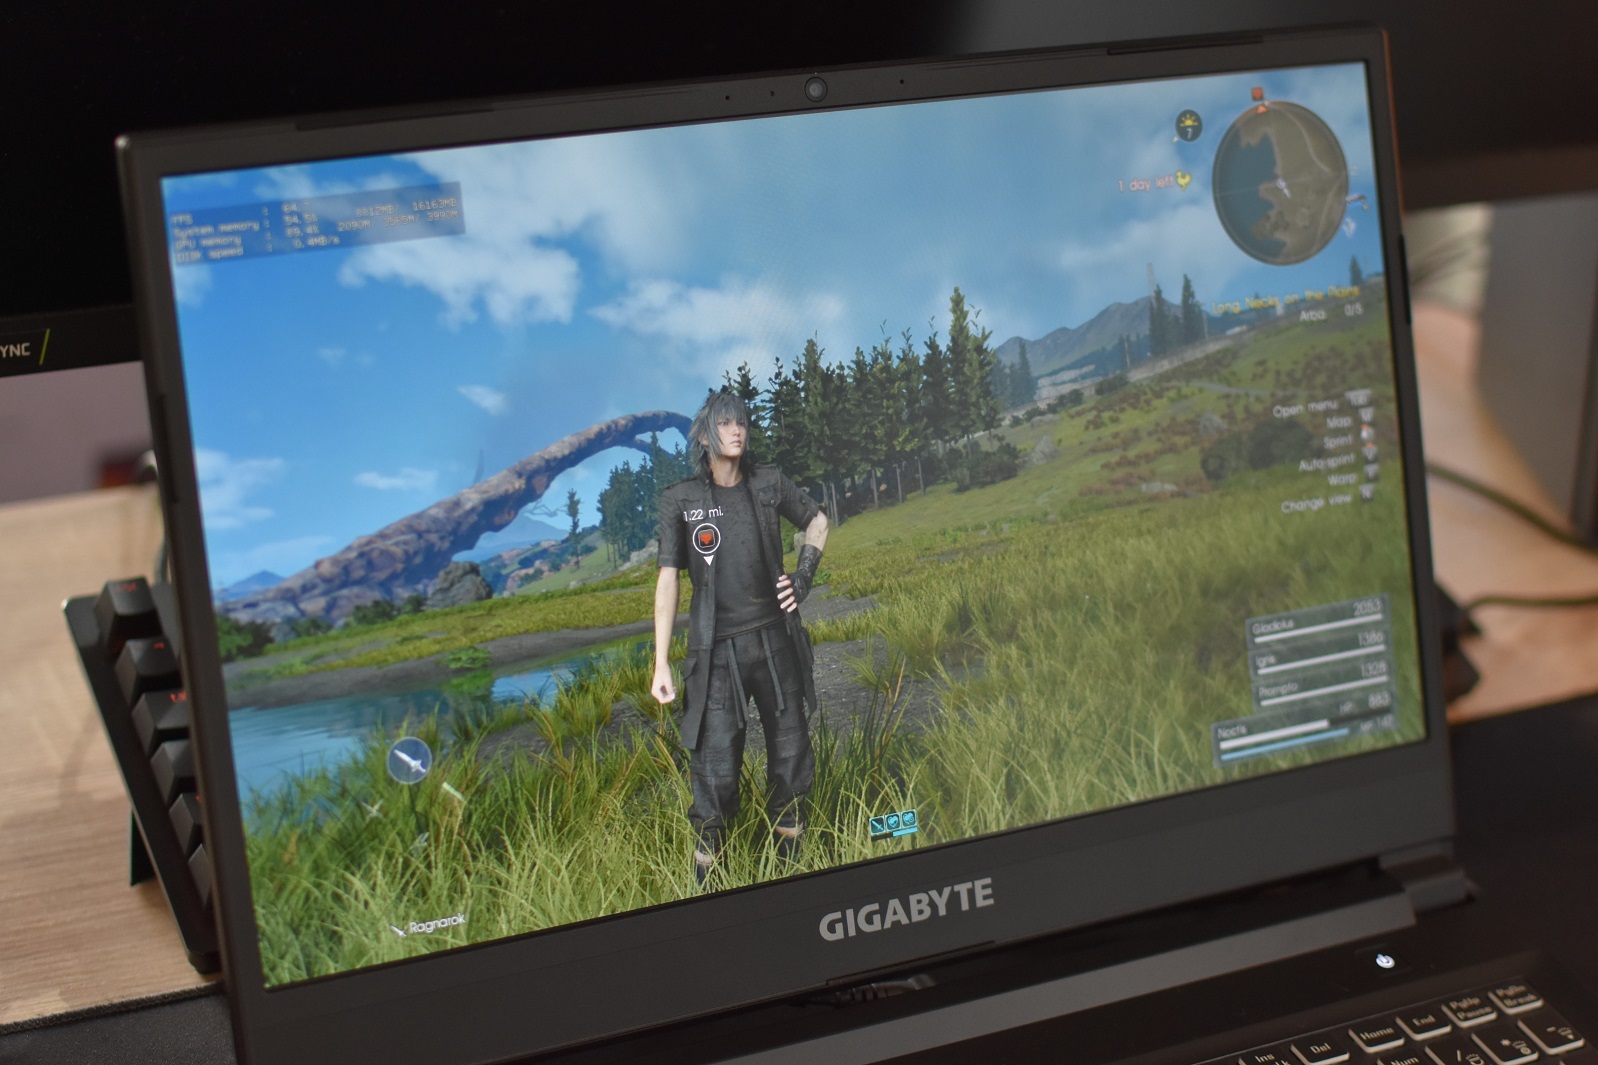 The Gigabyte G5 gaming laptop showing a scene from Final Fantasy XV on its display.